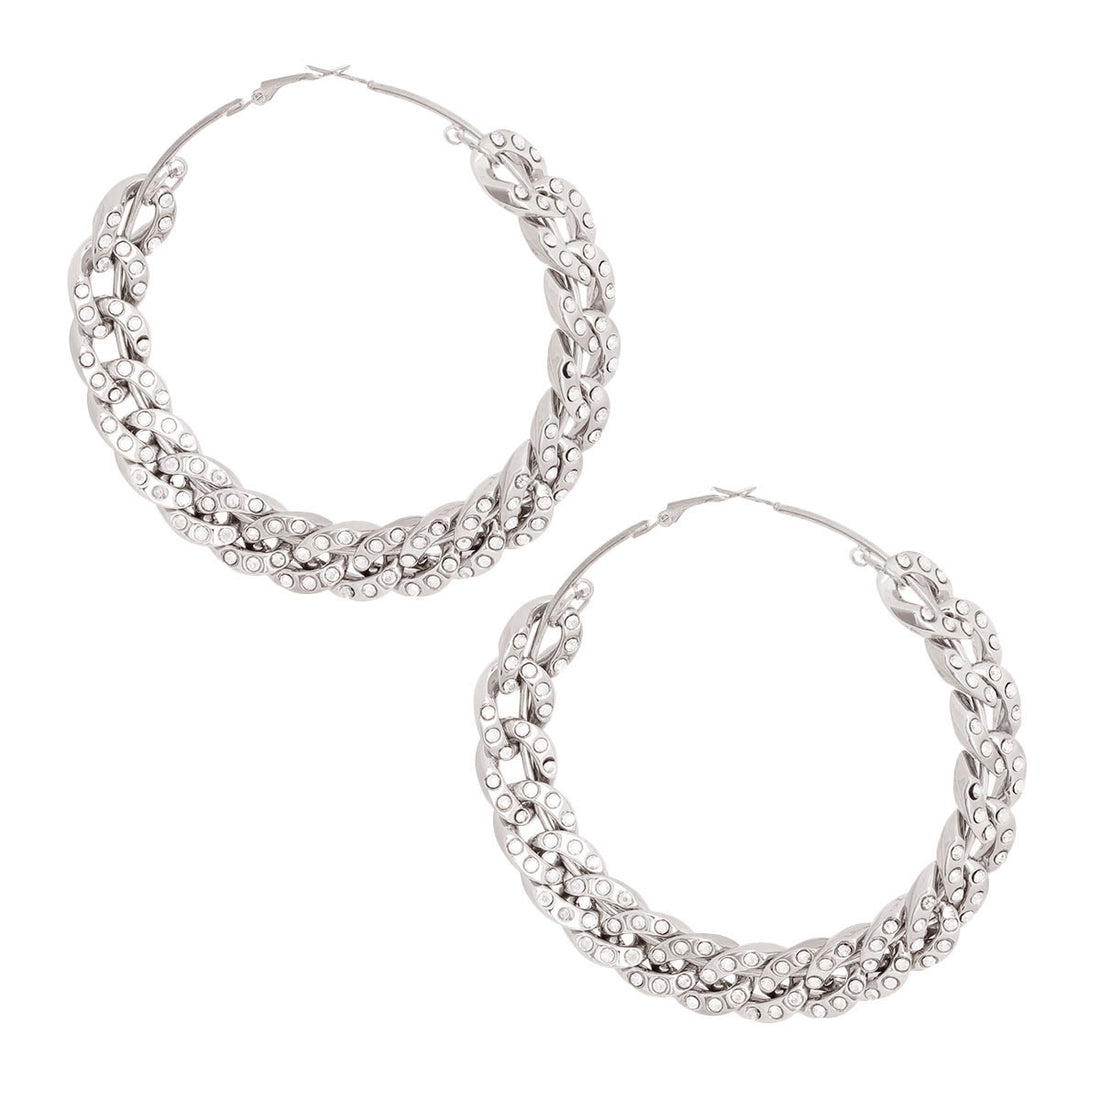 3 inch Silver Chain Hoops